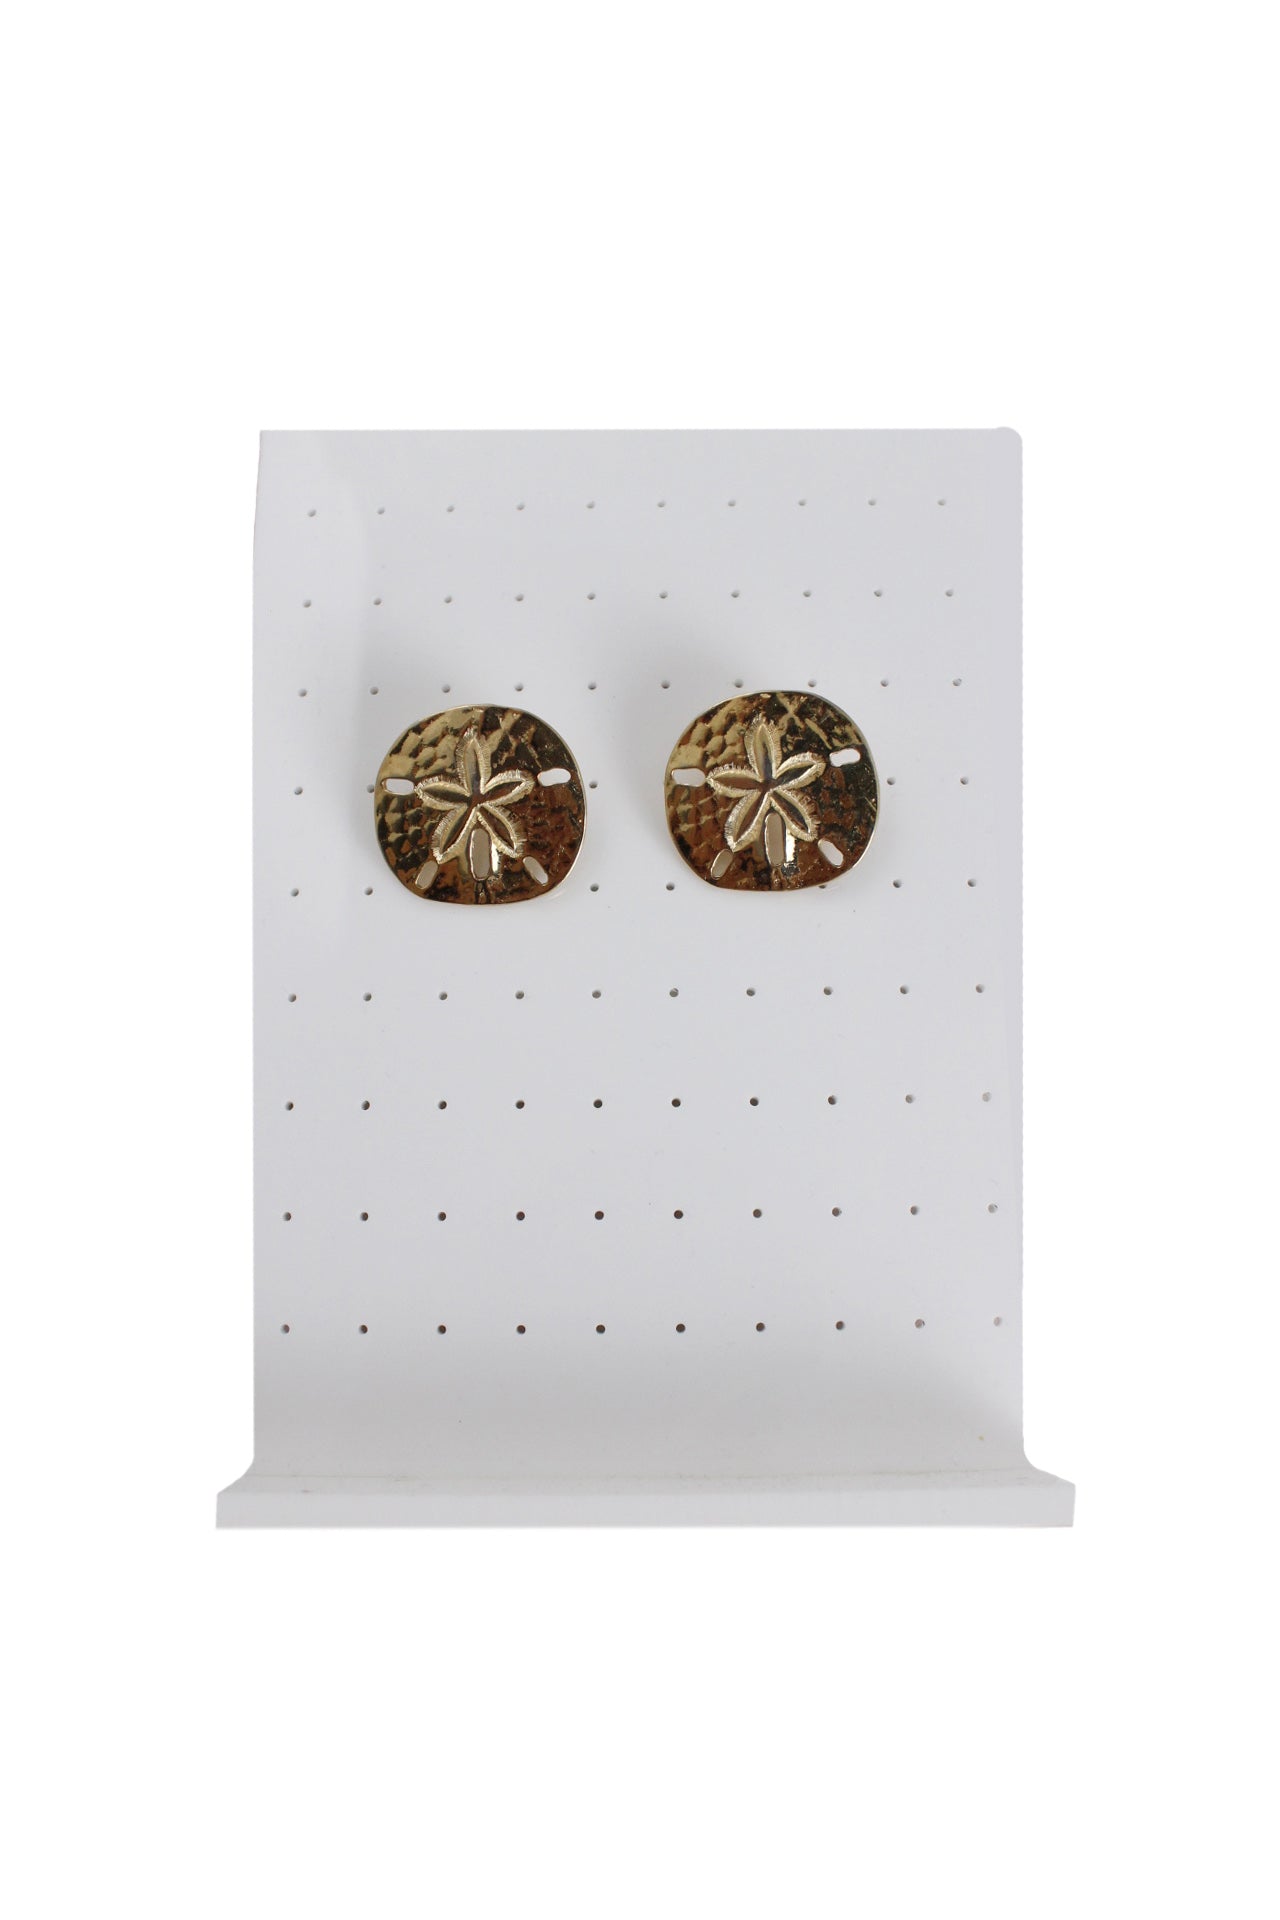 round gold toned metallic with a sand dollar-like center staged against an earring stand